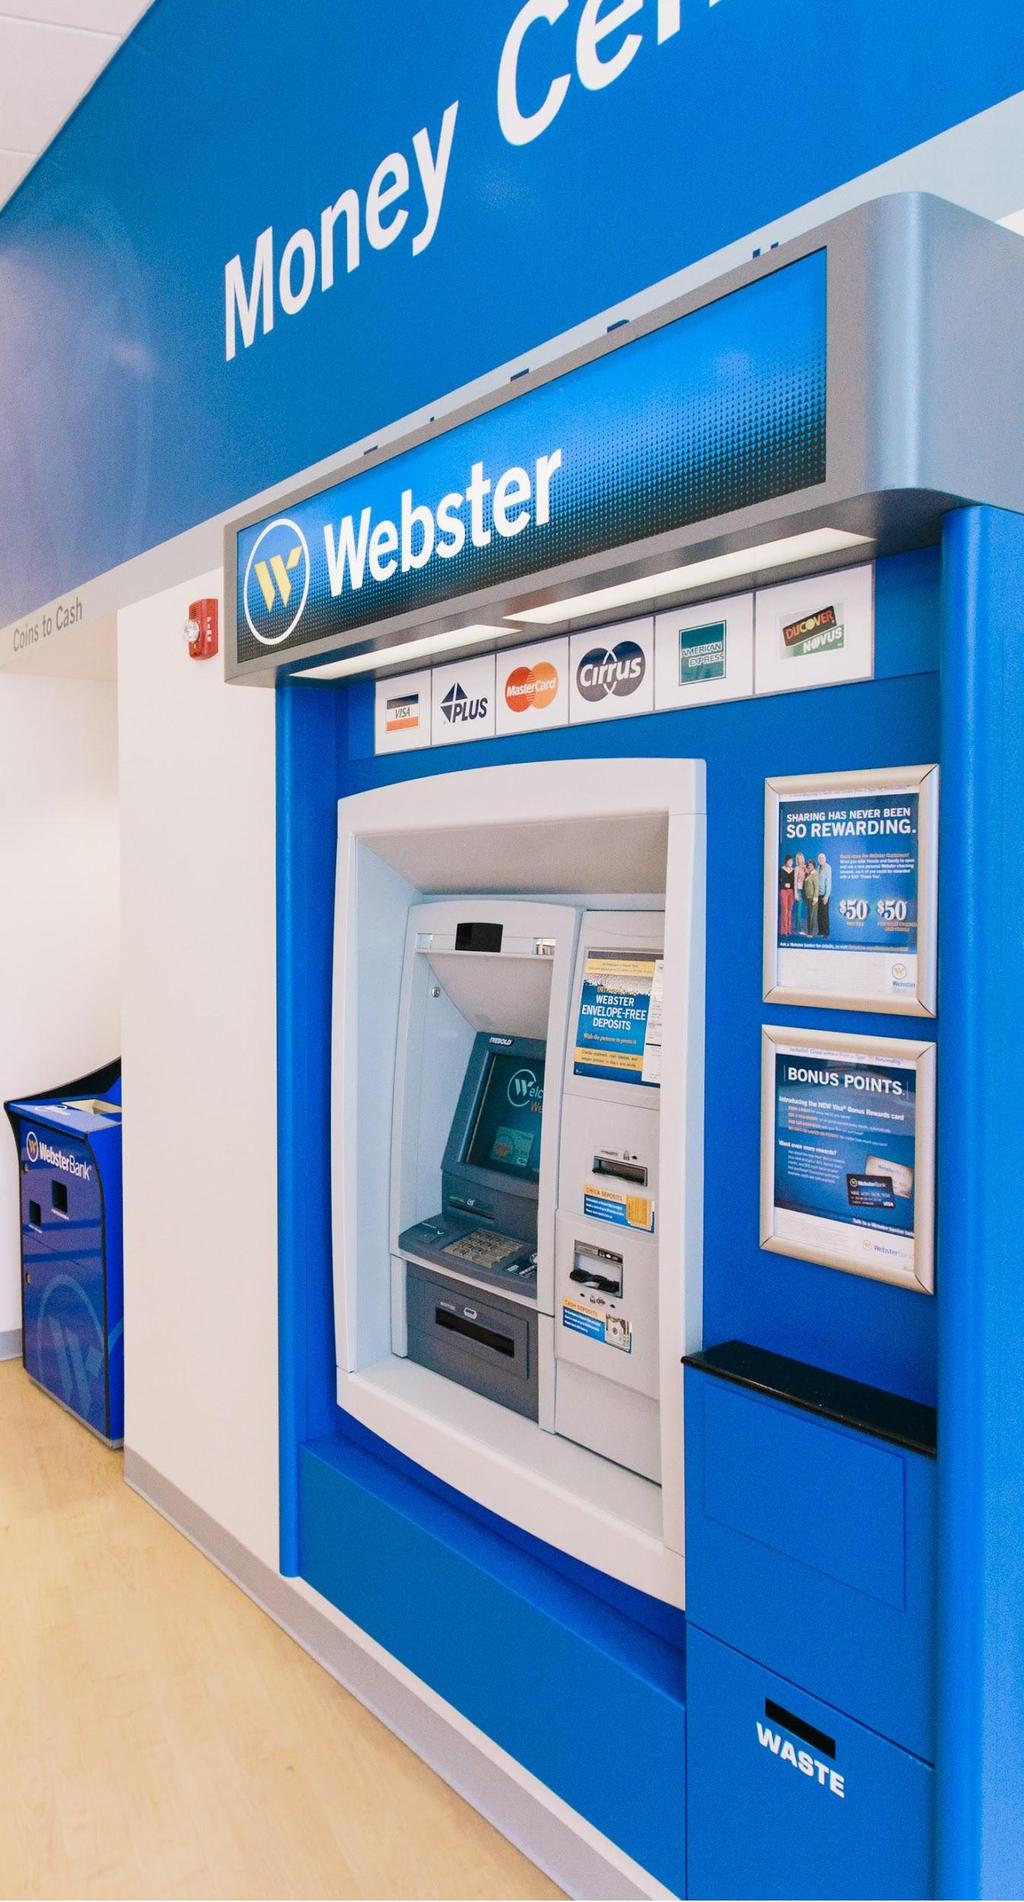 Automated Teller Machines (ATM) Must have a Personal Identification Number (PIN) Uses: Check account balances Make cash withdrawals and